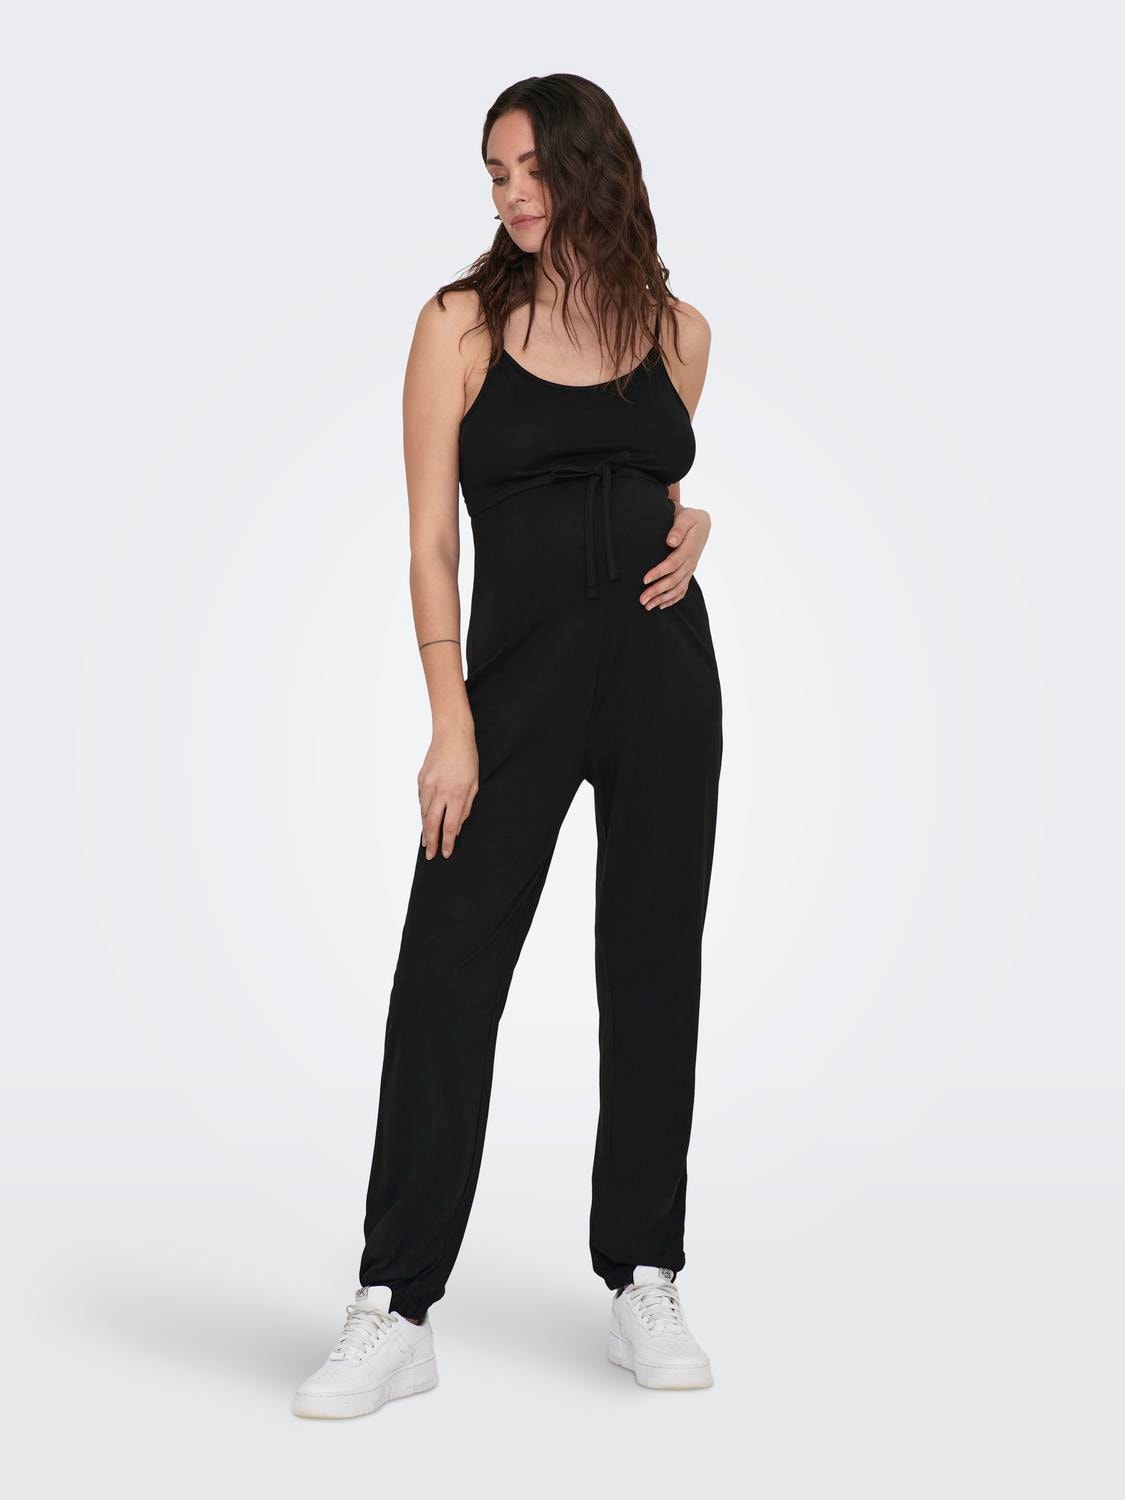 ONLY Camisole Maternity Body -Black - 15303218